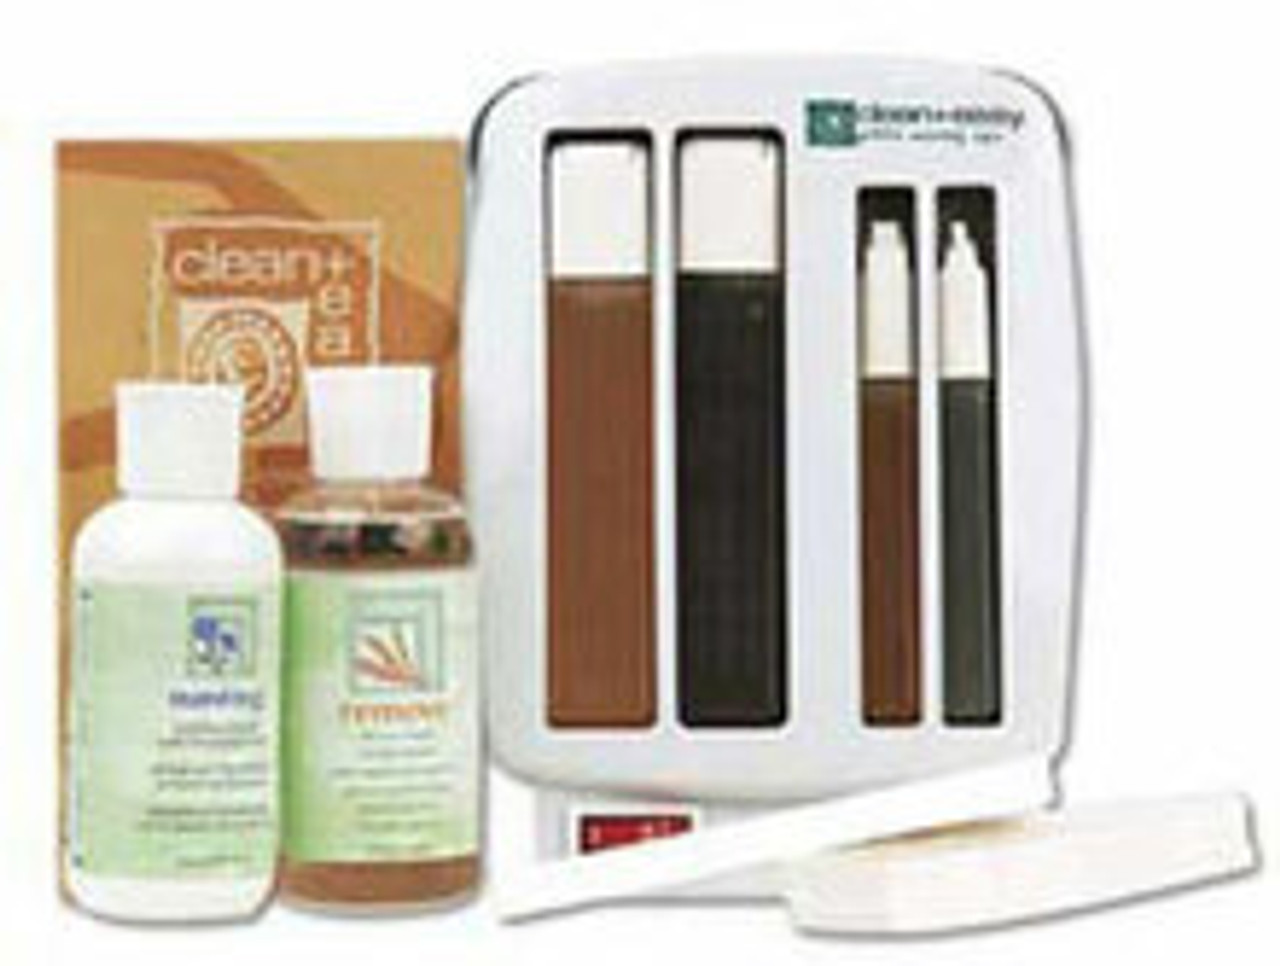 Clean + Easy Petite Waxing Spa "Starter Kit" ** Non-Returnable